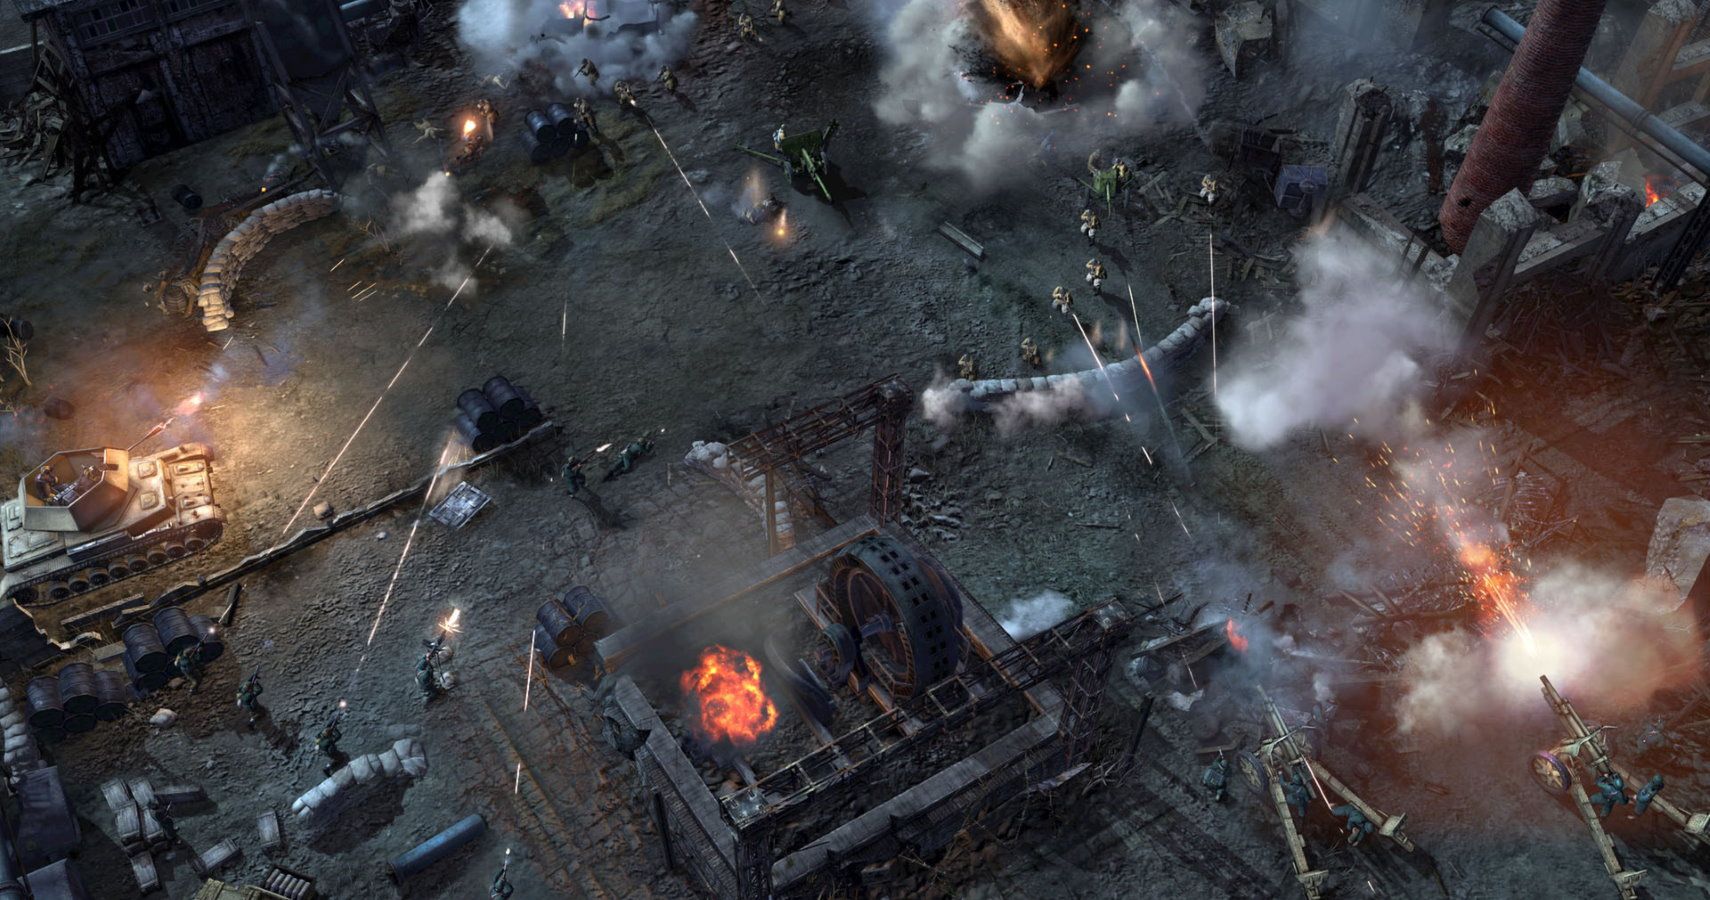 company of heroes 3 steam